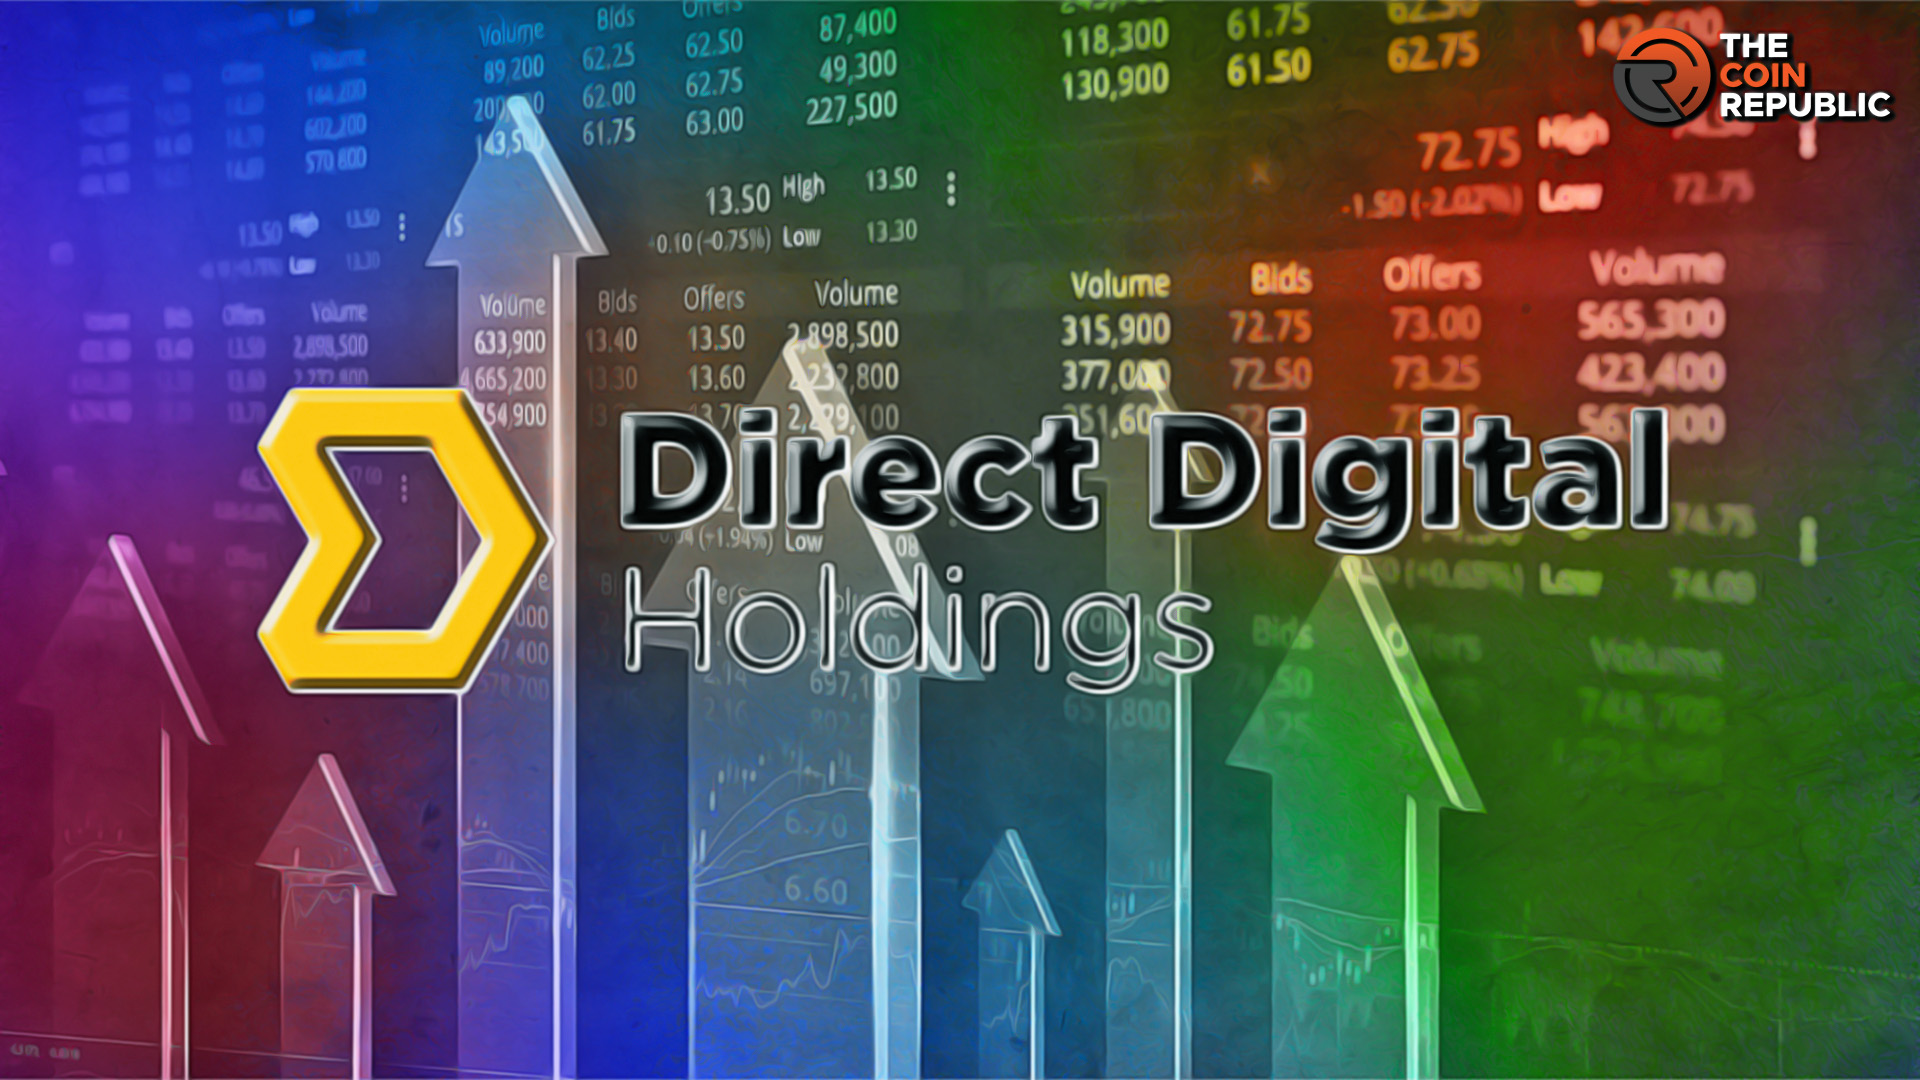 DRCT Stock Price Earnings Report Spikes Up Shares To 55